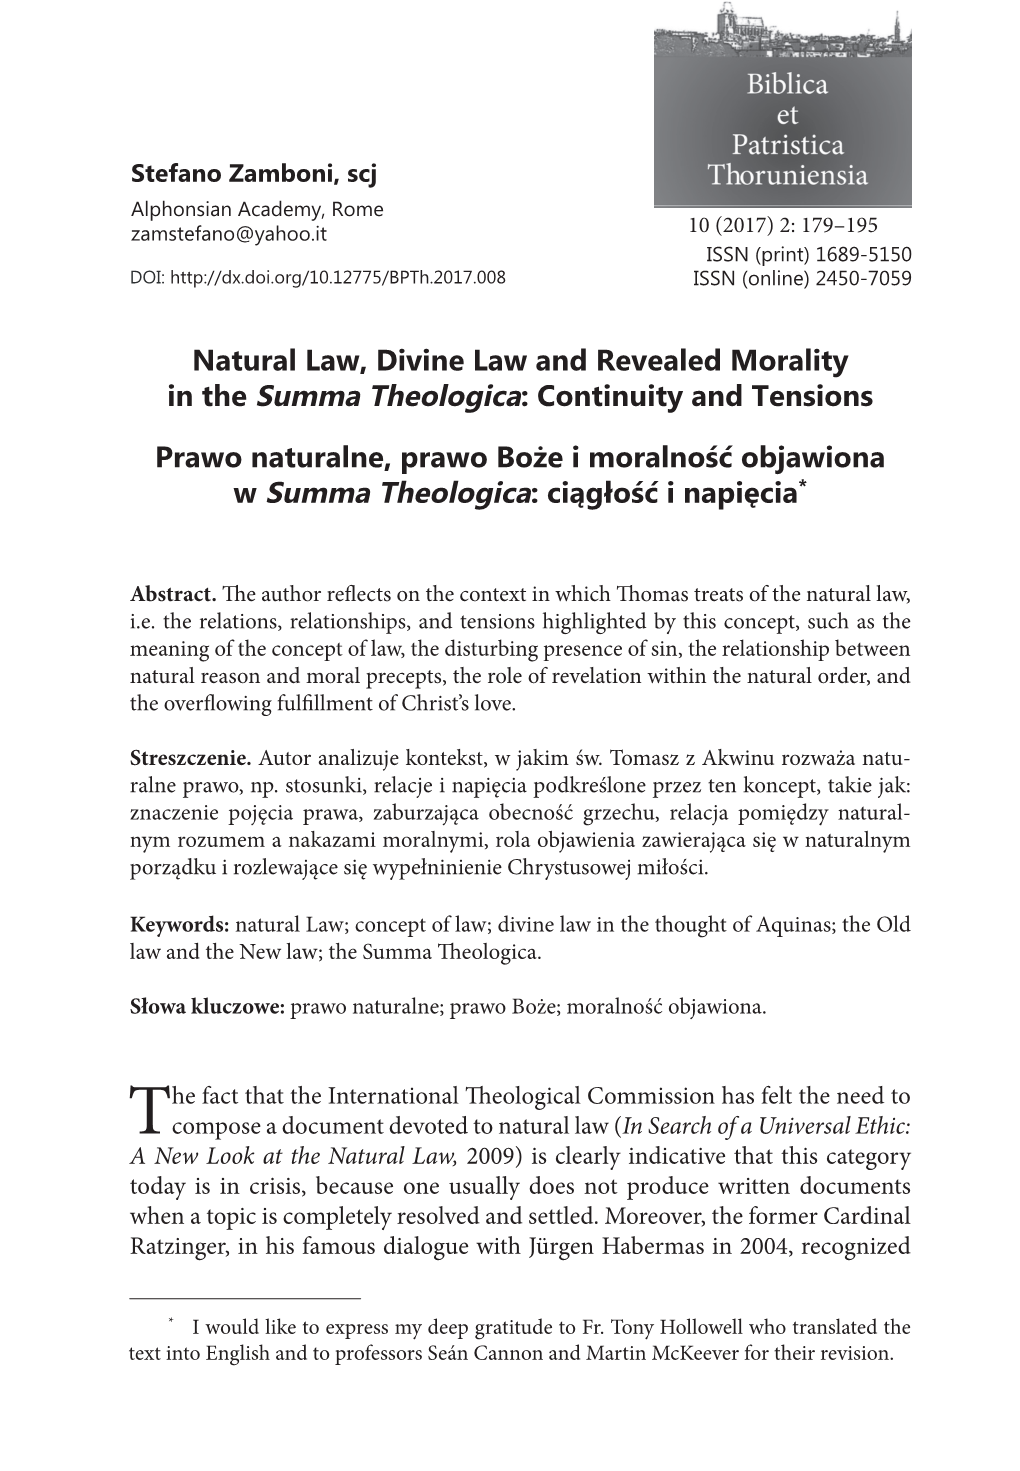 Natural Law, Divine Law and Revealed Morality in the Summa Theologica: Continuity and Tensions